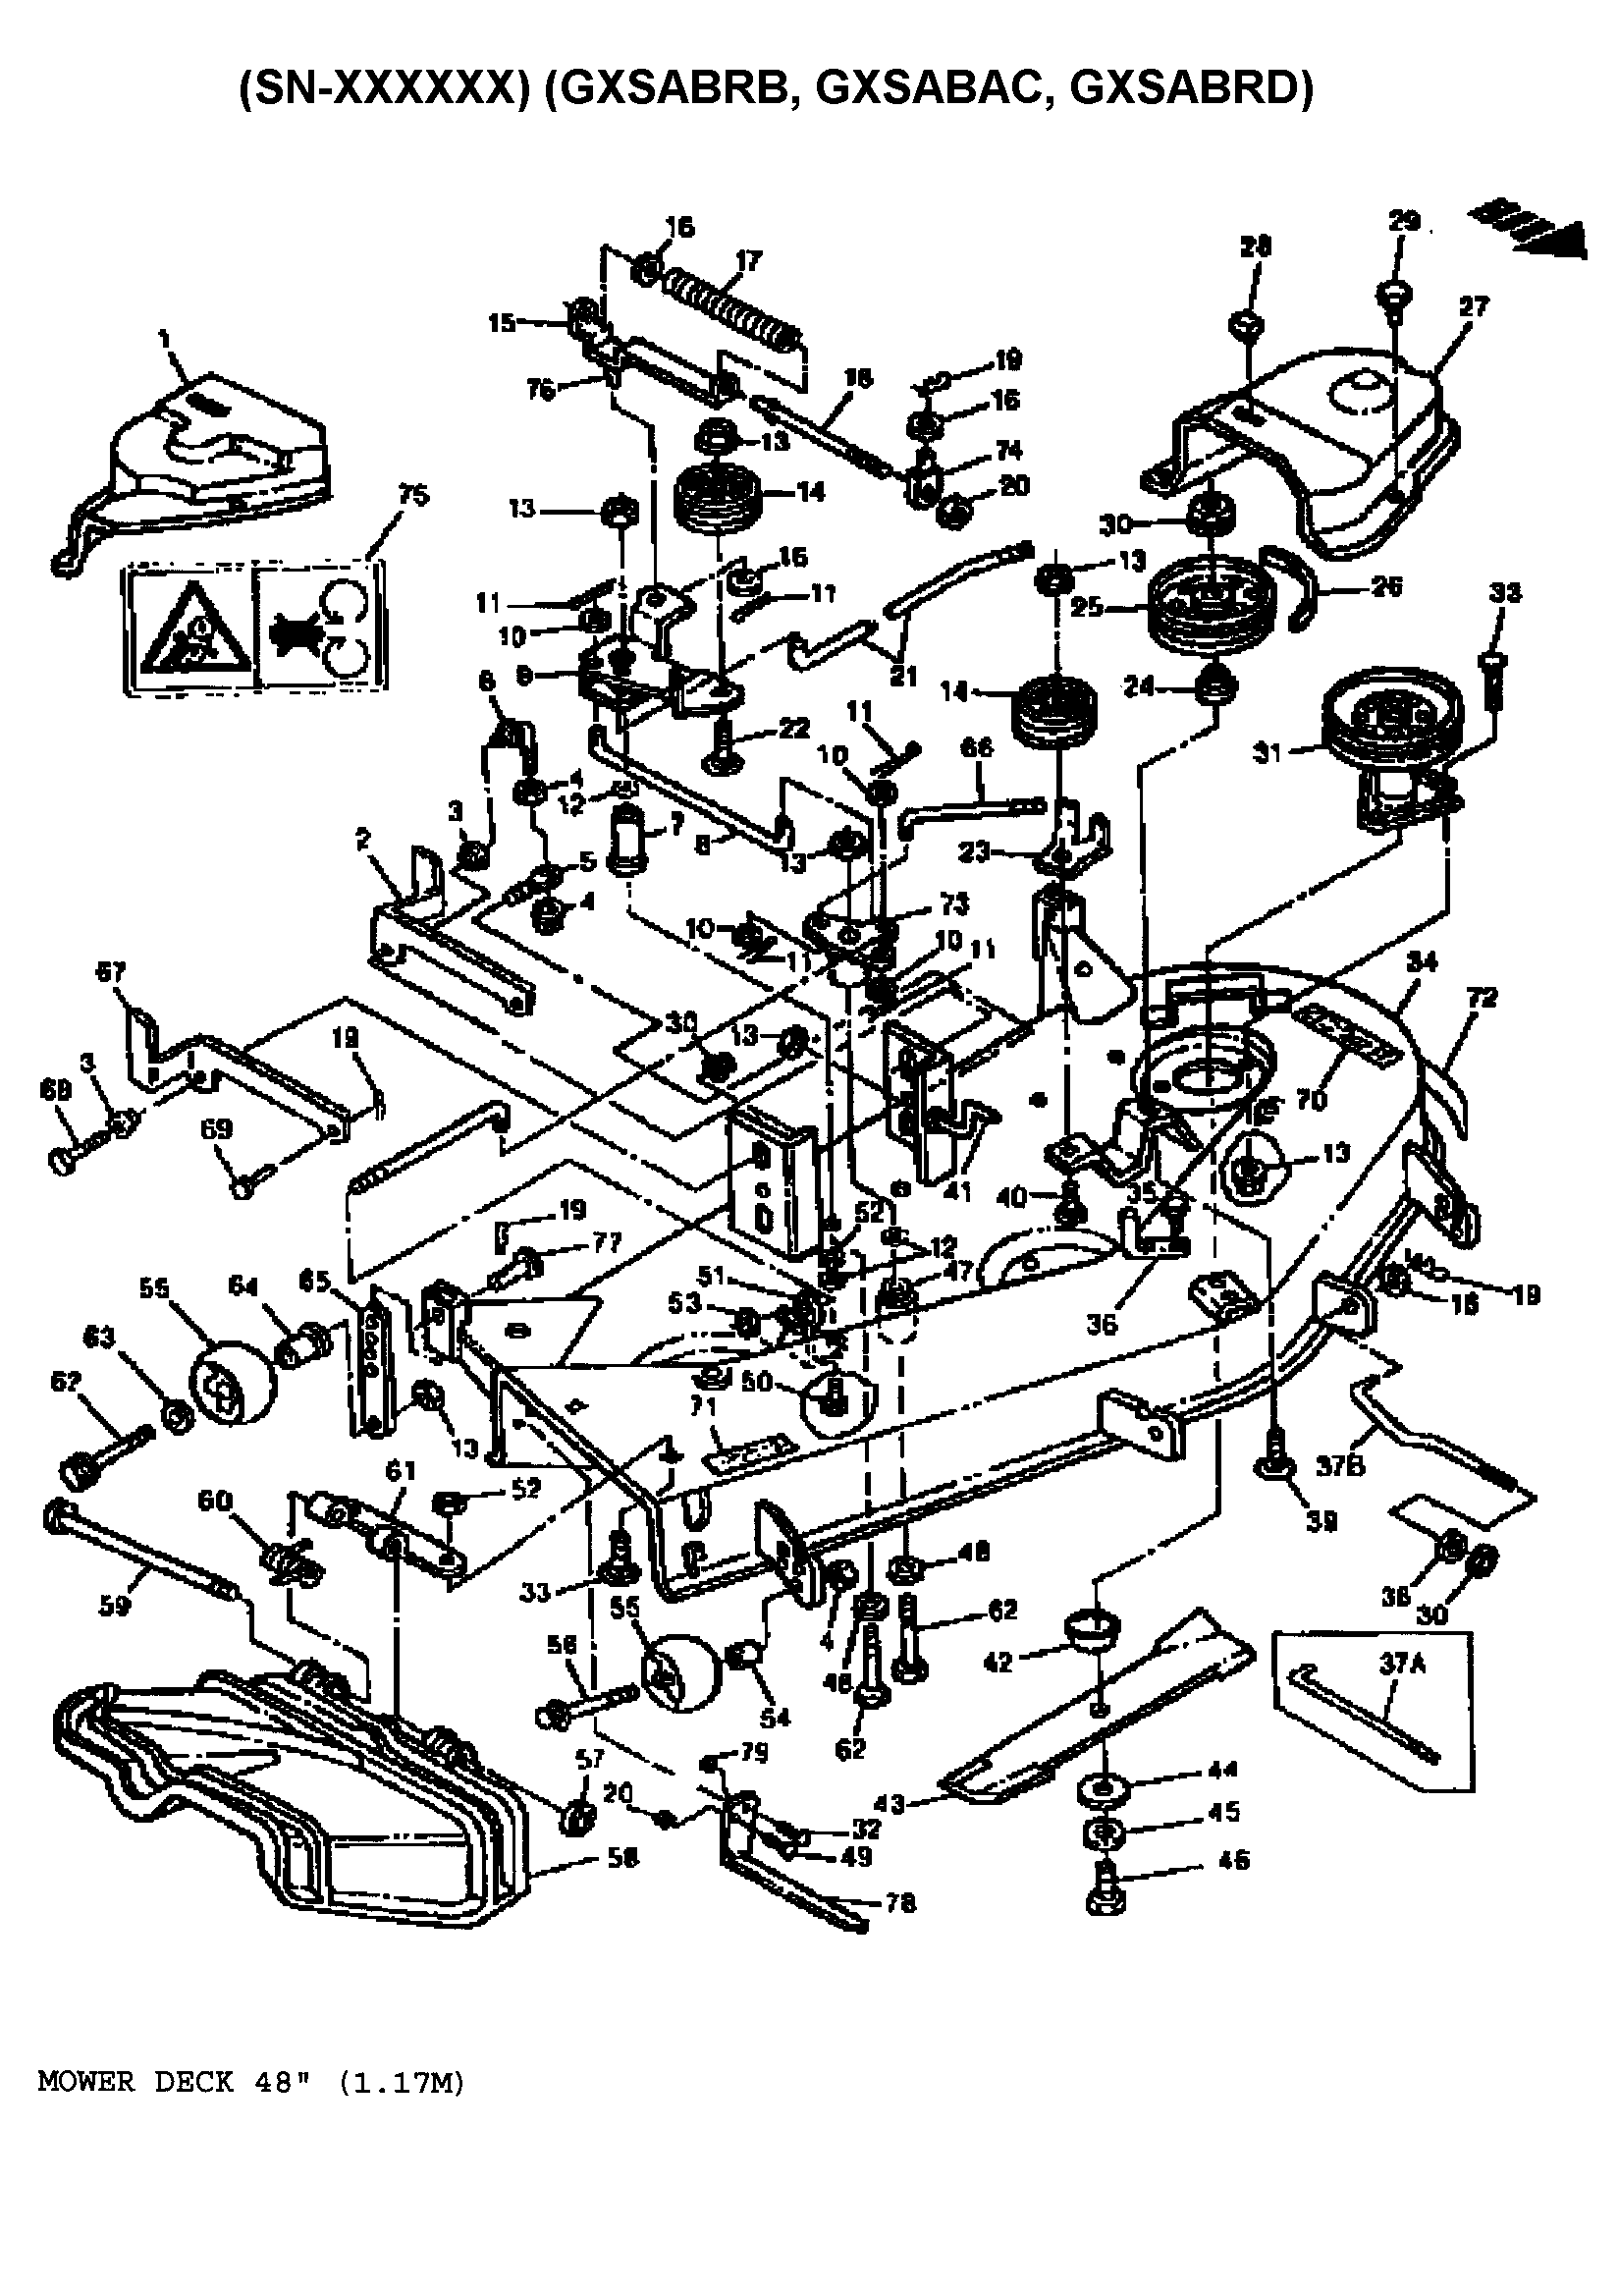 Mower Deck 48 117m Diagram And Parts List For Model 1338geargxsabrf